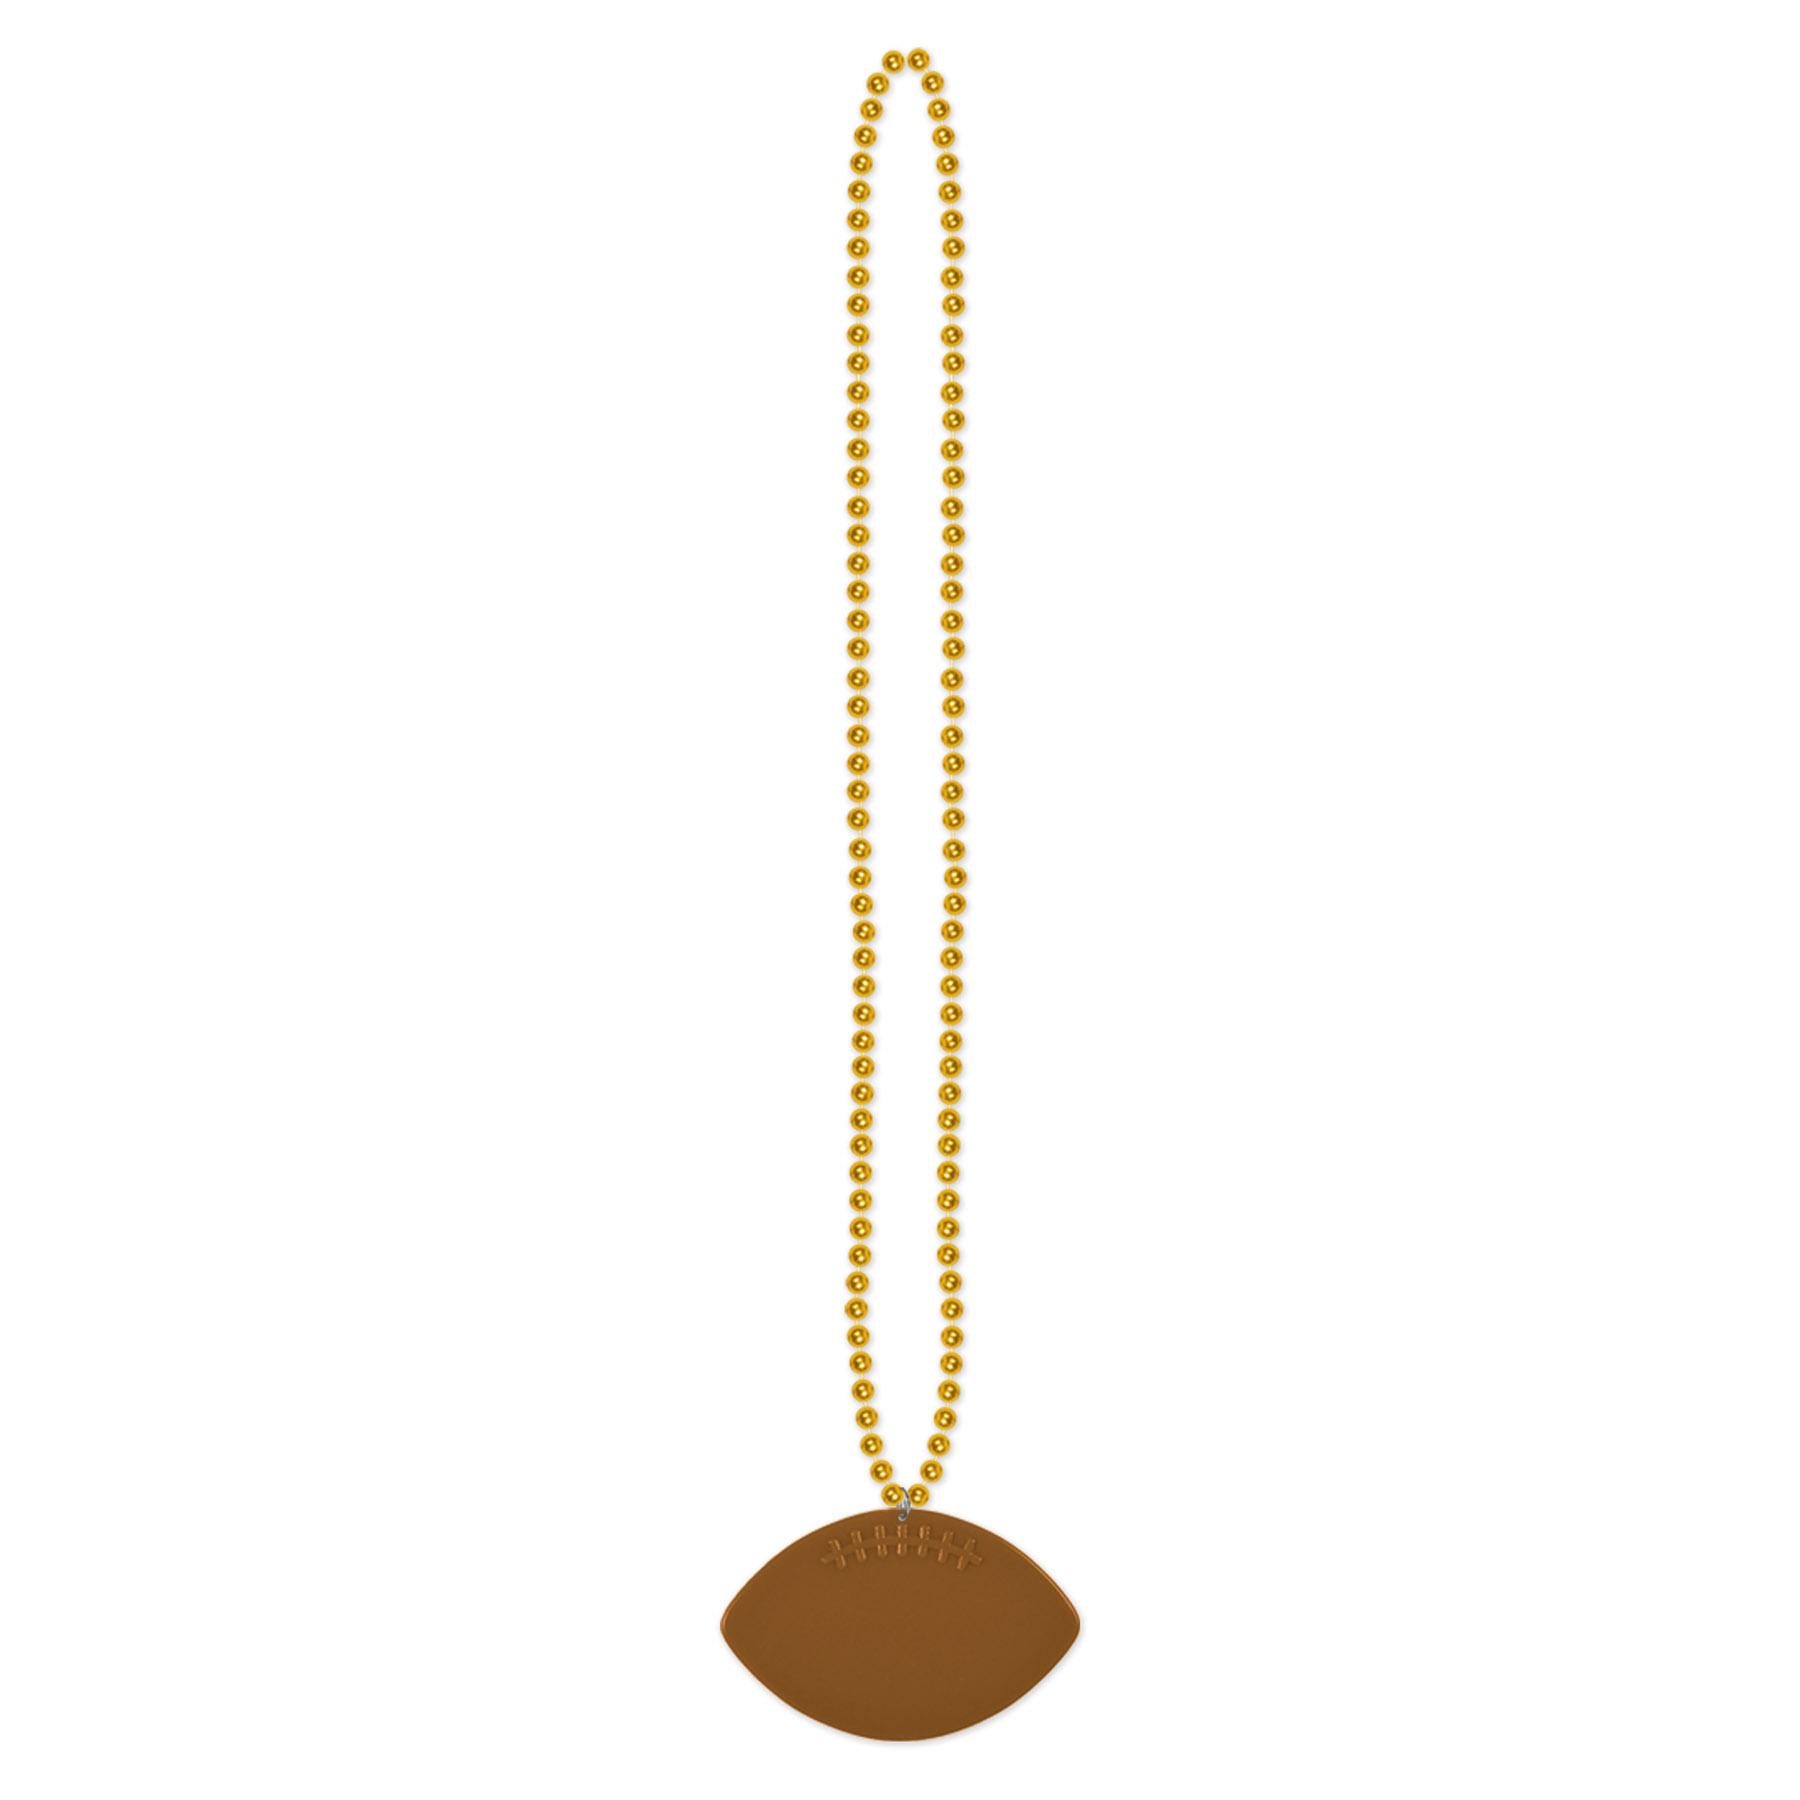 Gold Party Bead Necklaces with Football Medallion (12 per Case)